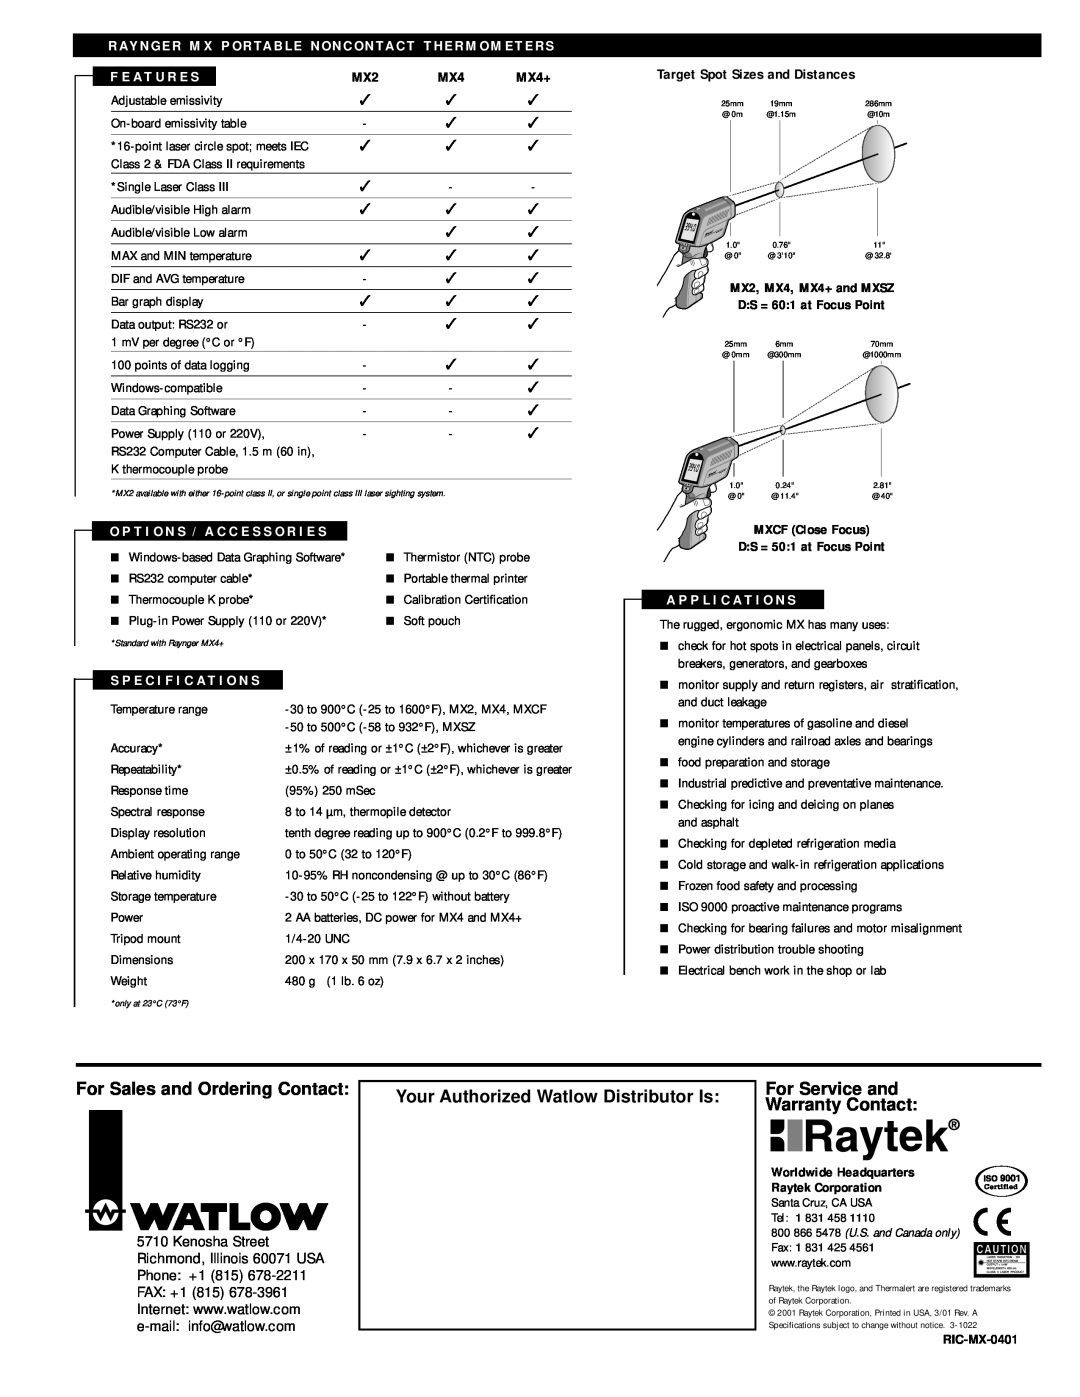 RayTek MX Series For Sales and Ordering Contact, Your Authorized Watlow Distributor Is, For Service and Warranty Contact 